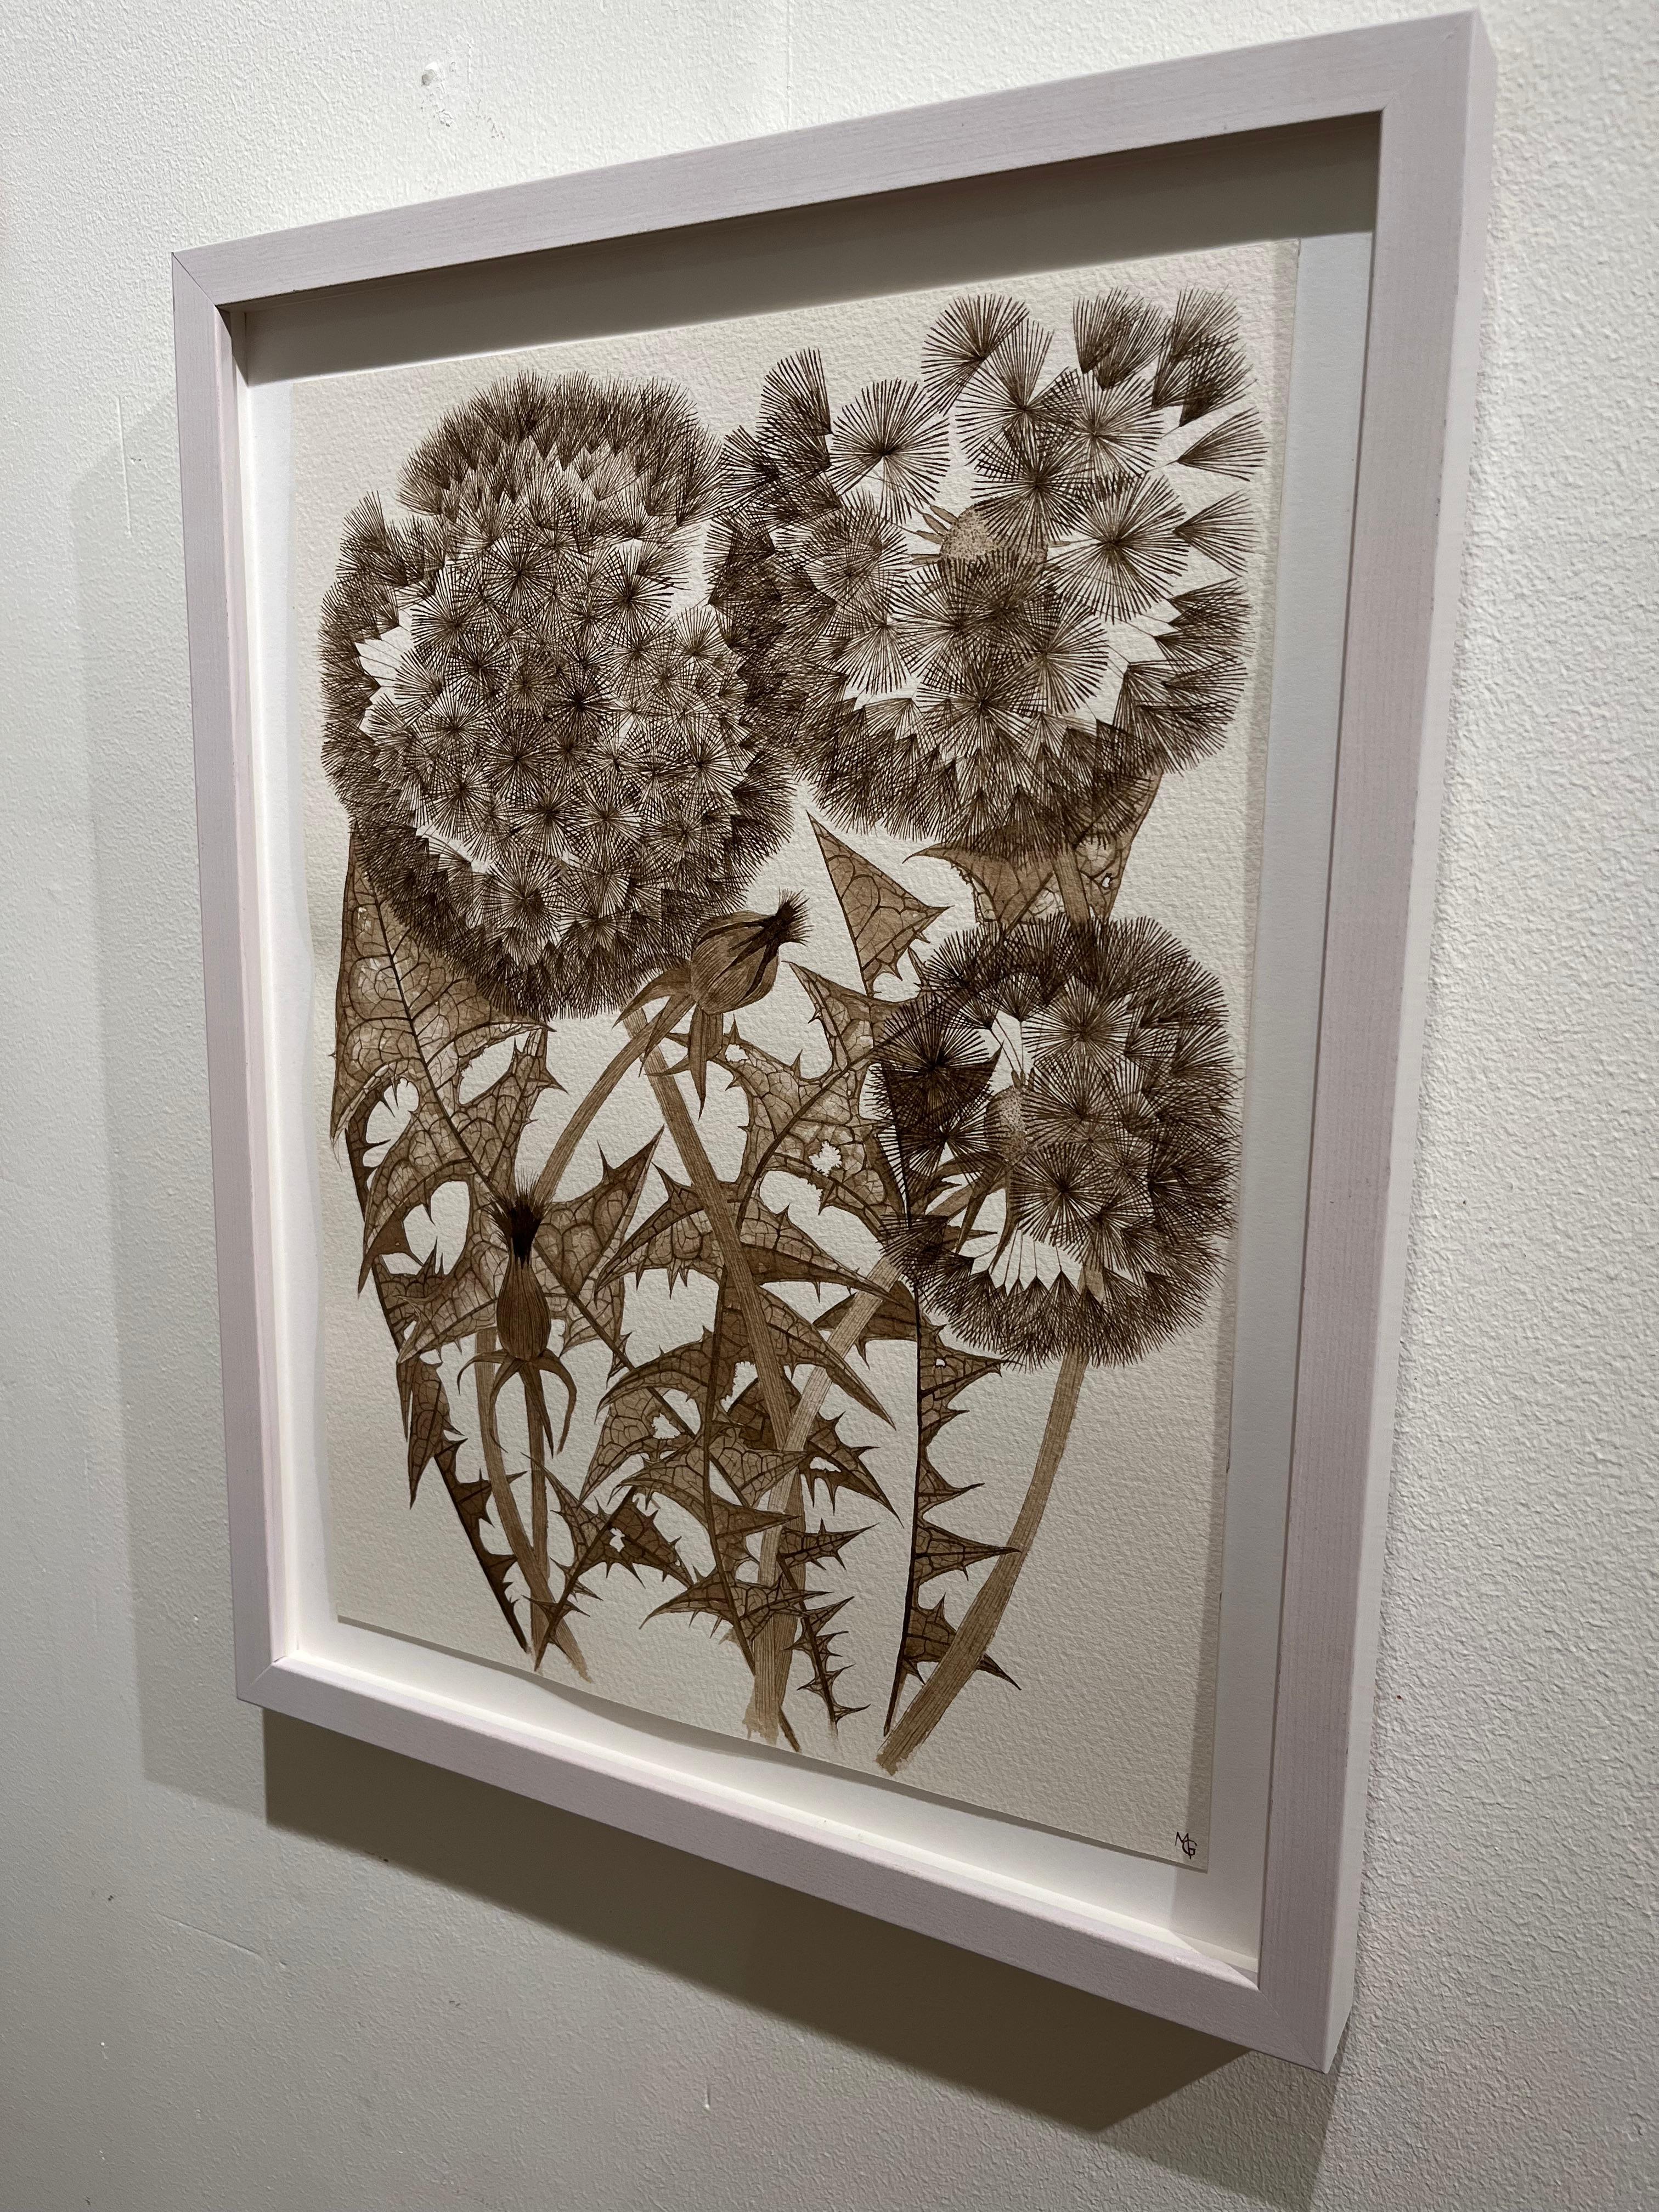 Margot Glass’s rendering of detail demands close attention. Her play with positive and negative space—the almost imperceptible shade of translucence between leaf veins, or the rich puff of a seed head—draws her viewer into a close embrace. Space and